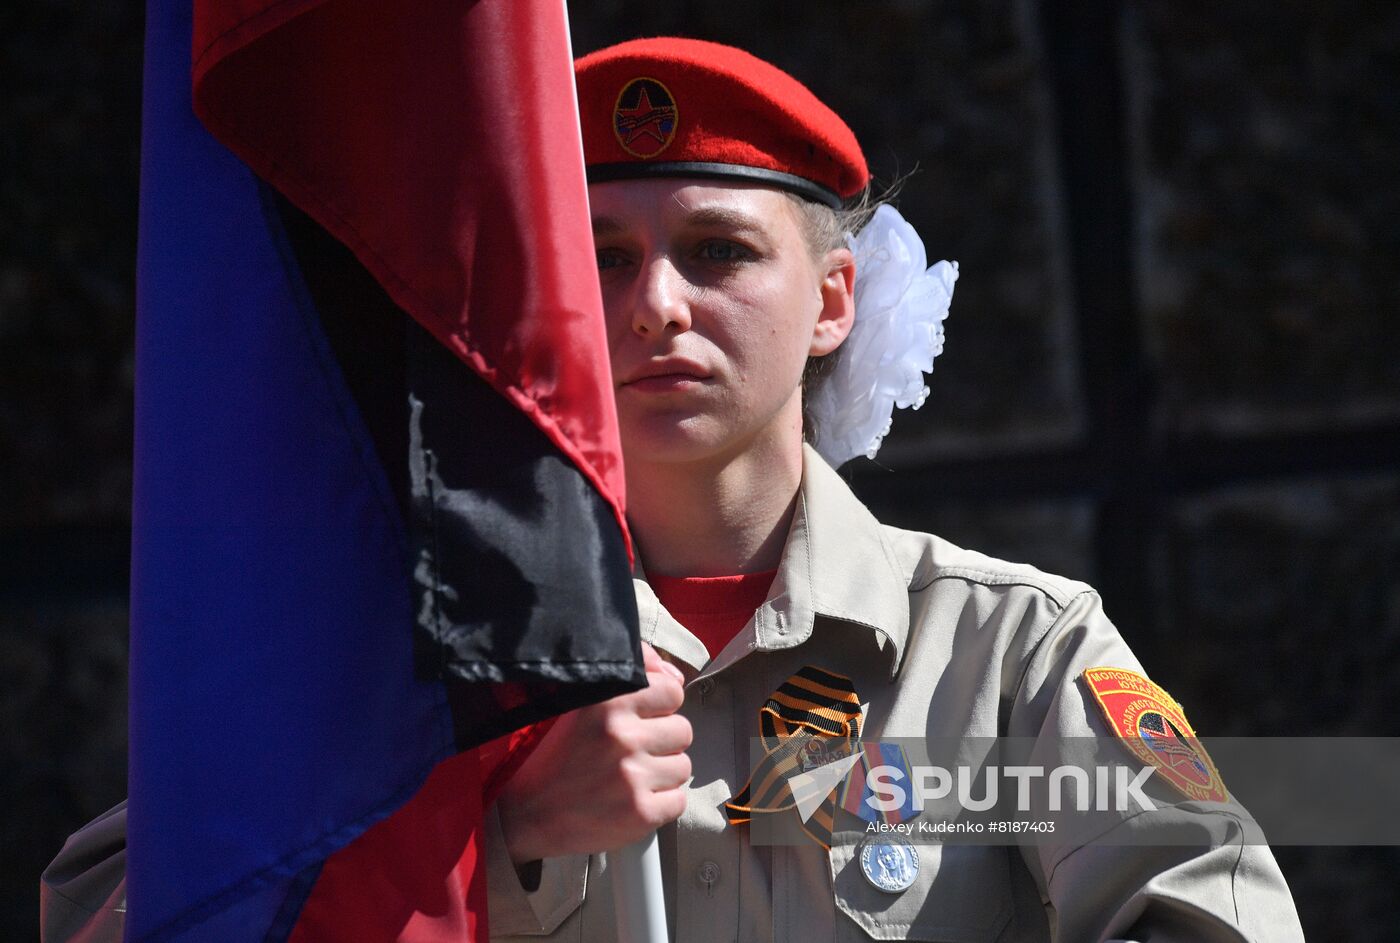 DPR WWII Victory Day Celebrations